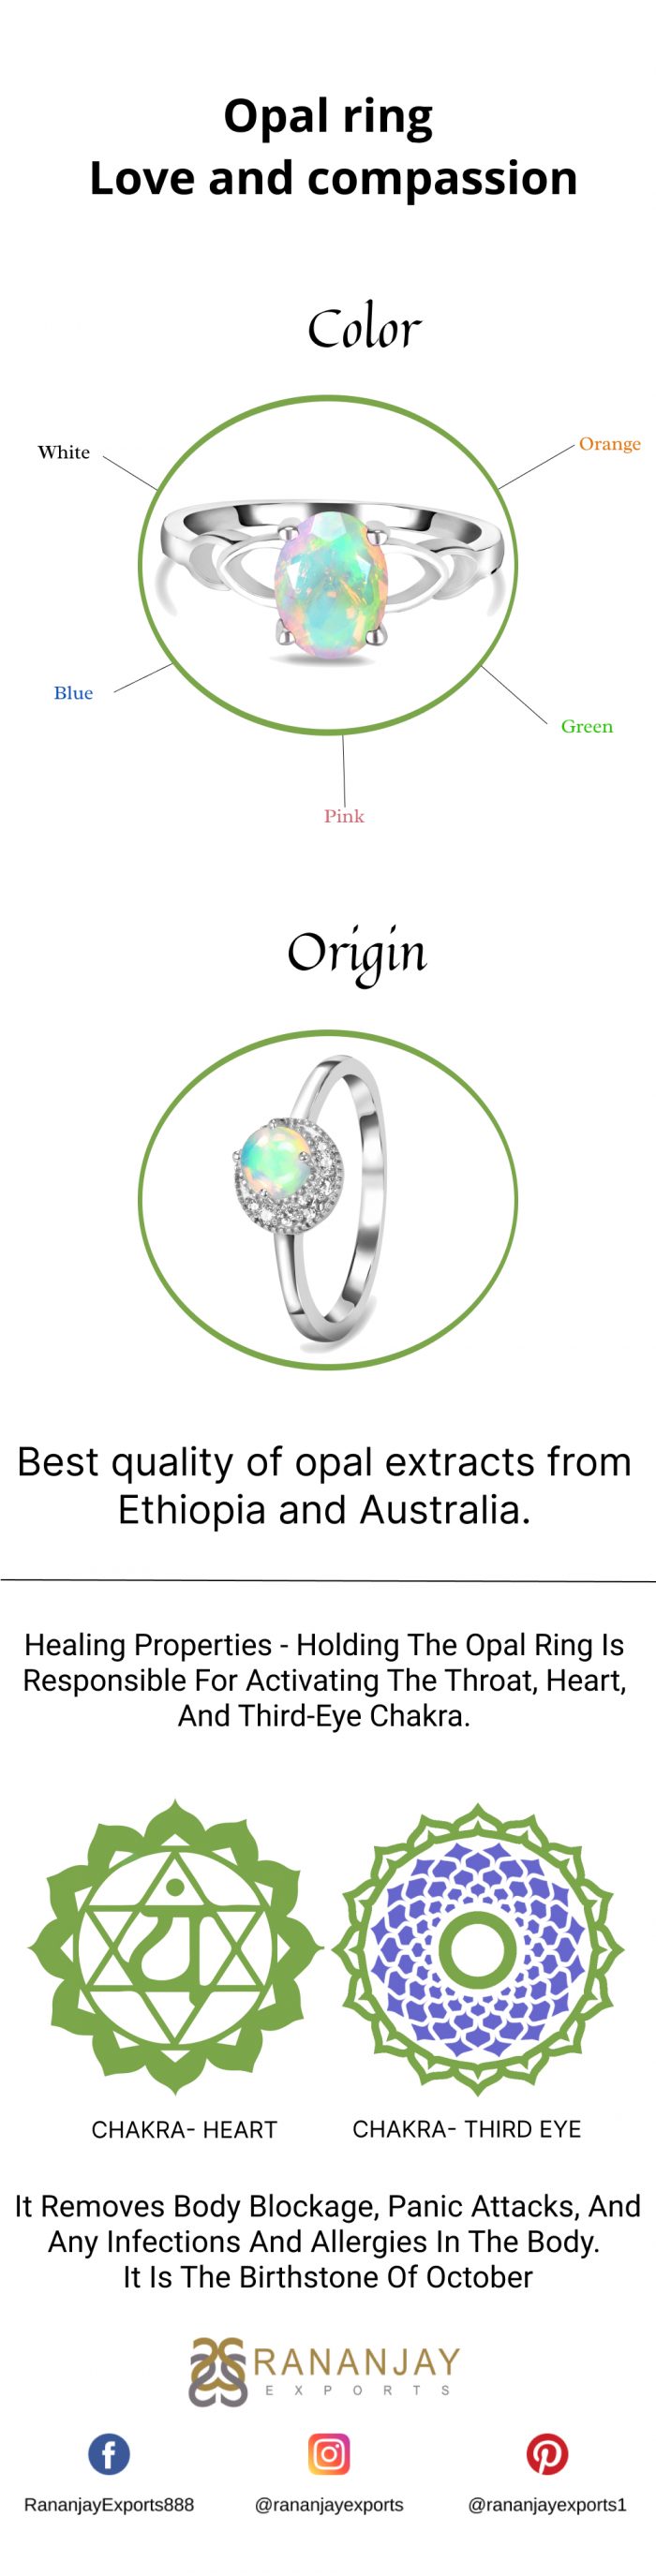 Opal Ring-Love and Compassion